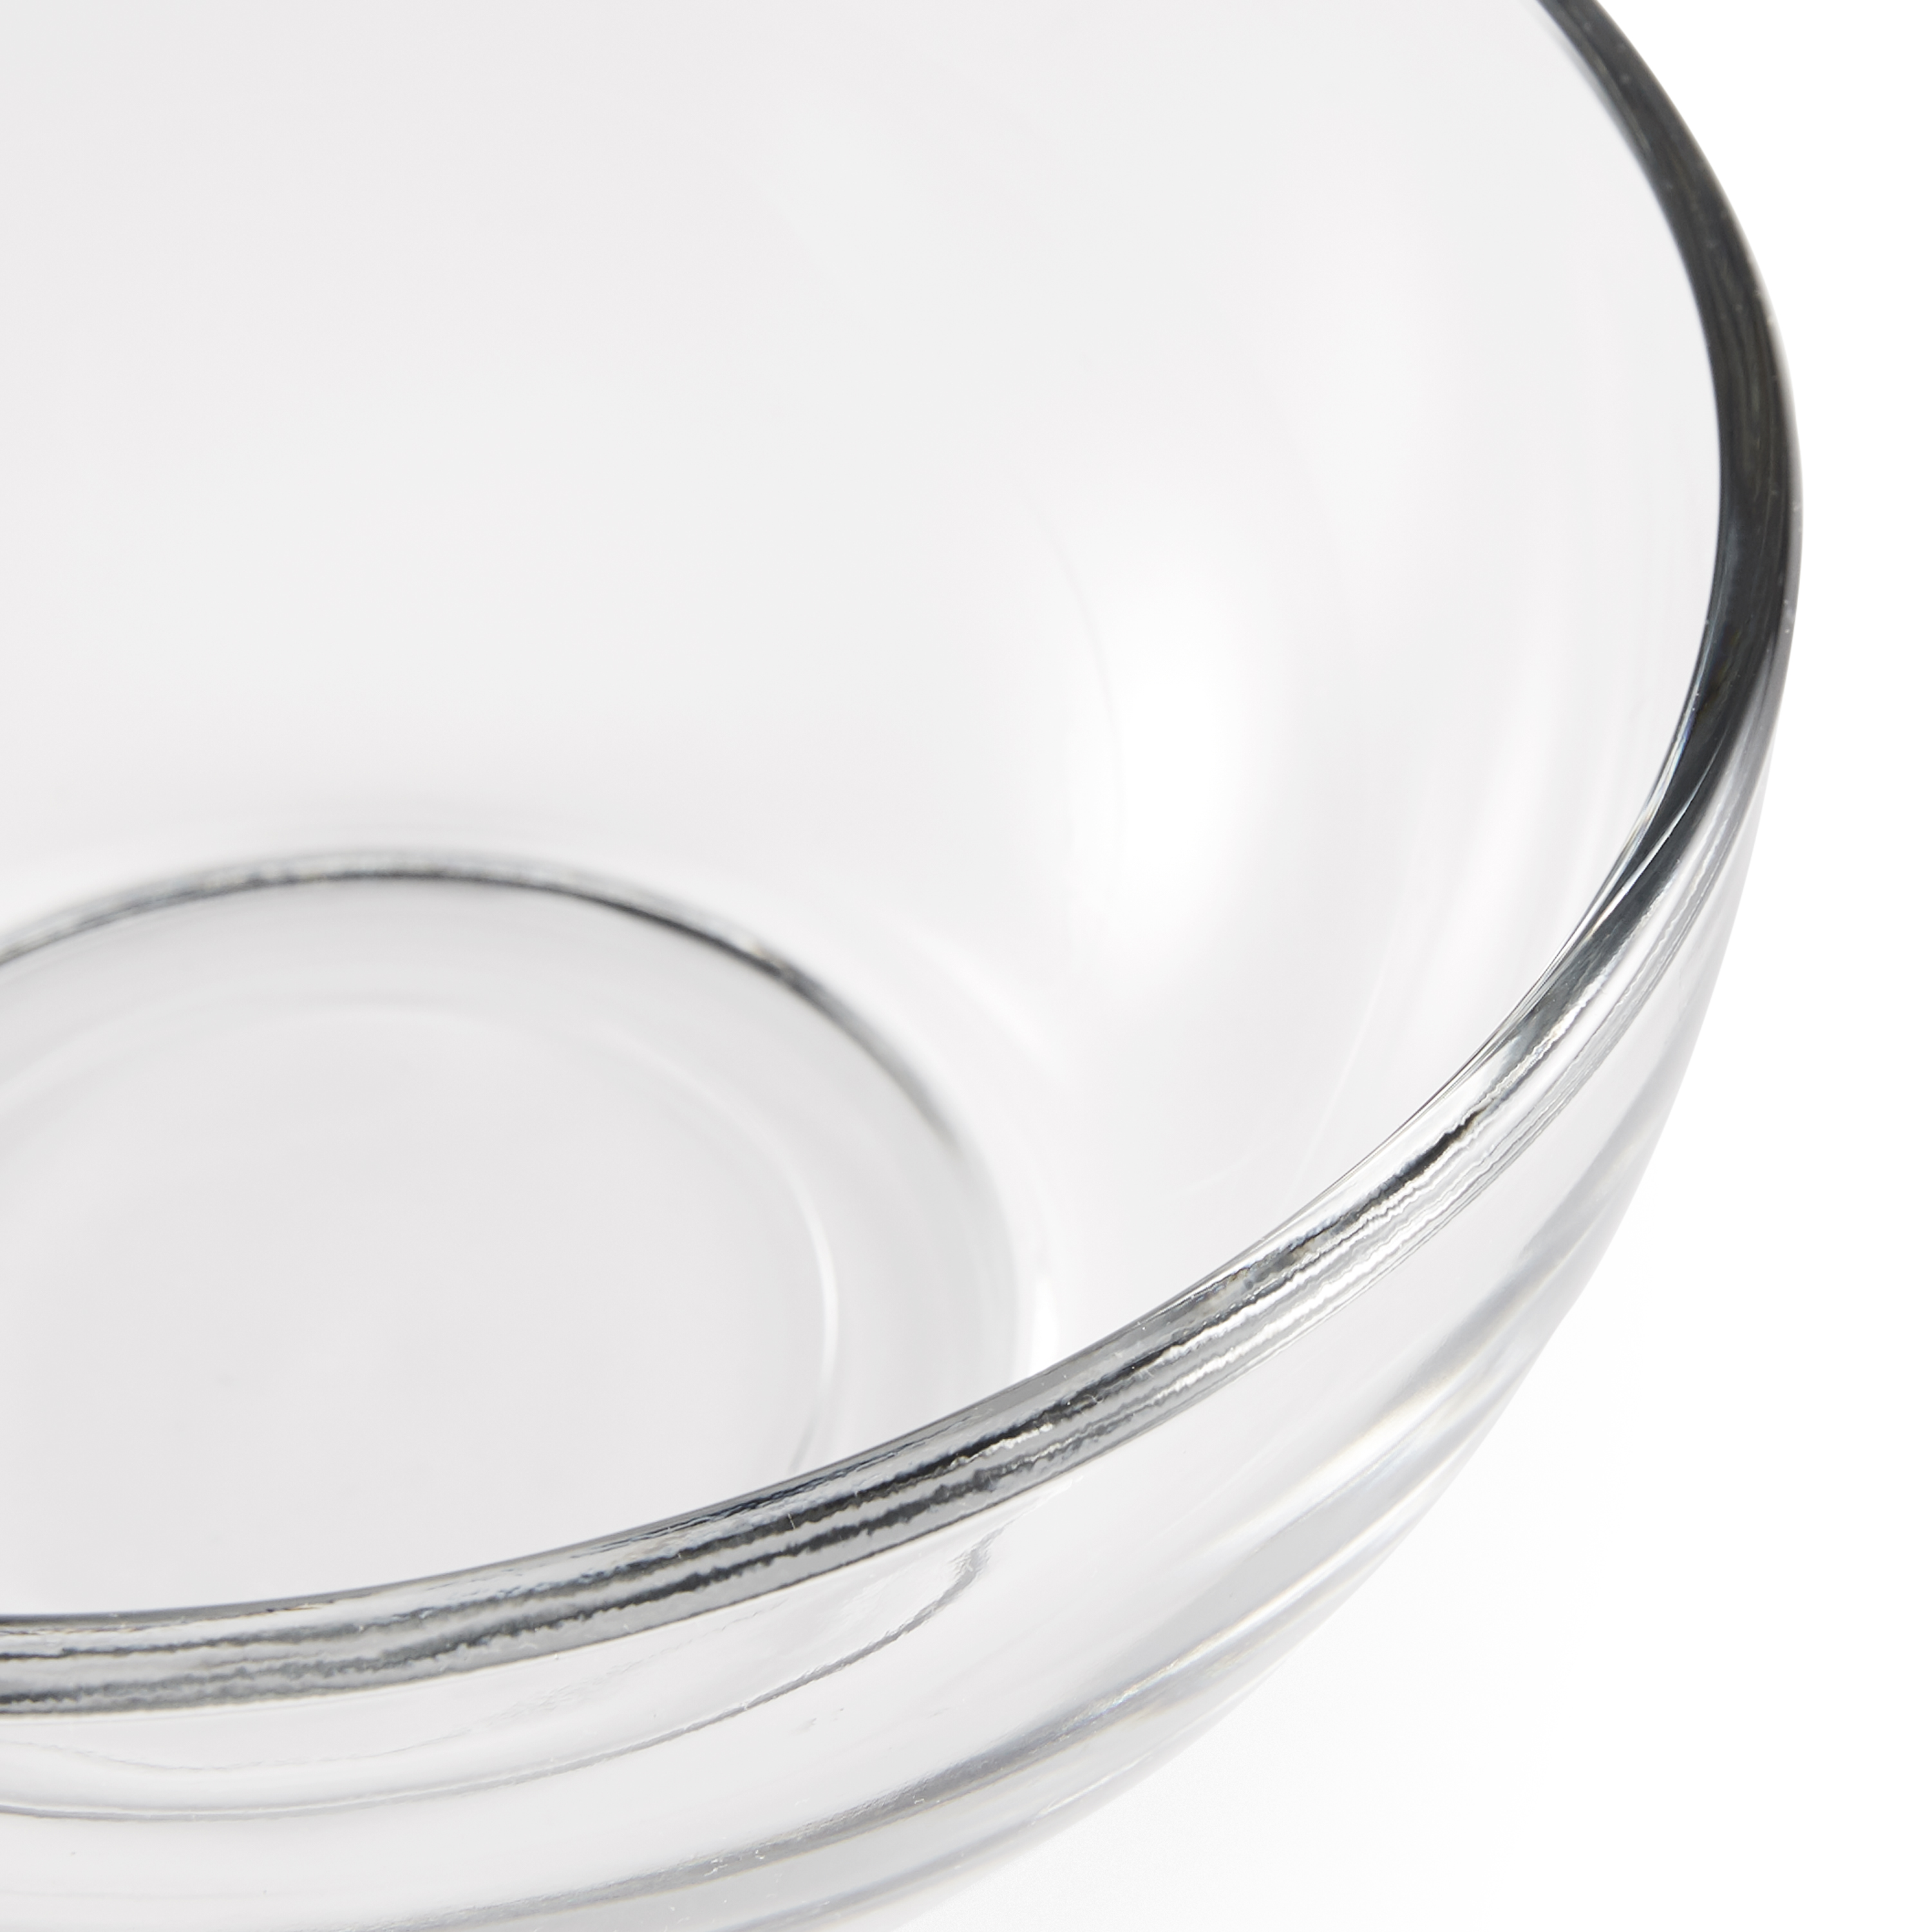 Mainstays Round Glass Bowls Catering Pack, Set of 12 - image 4 of 10